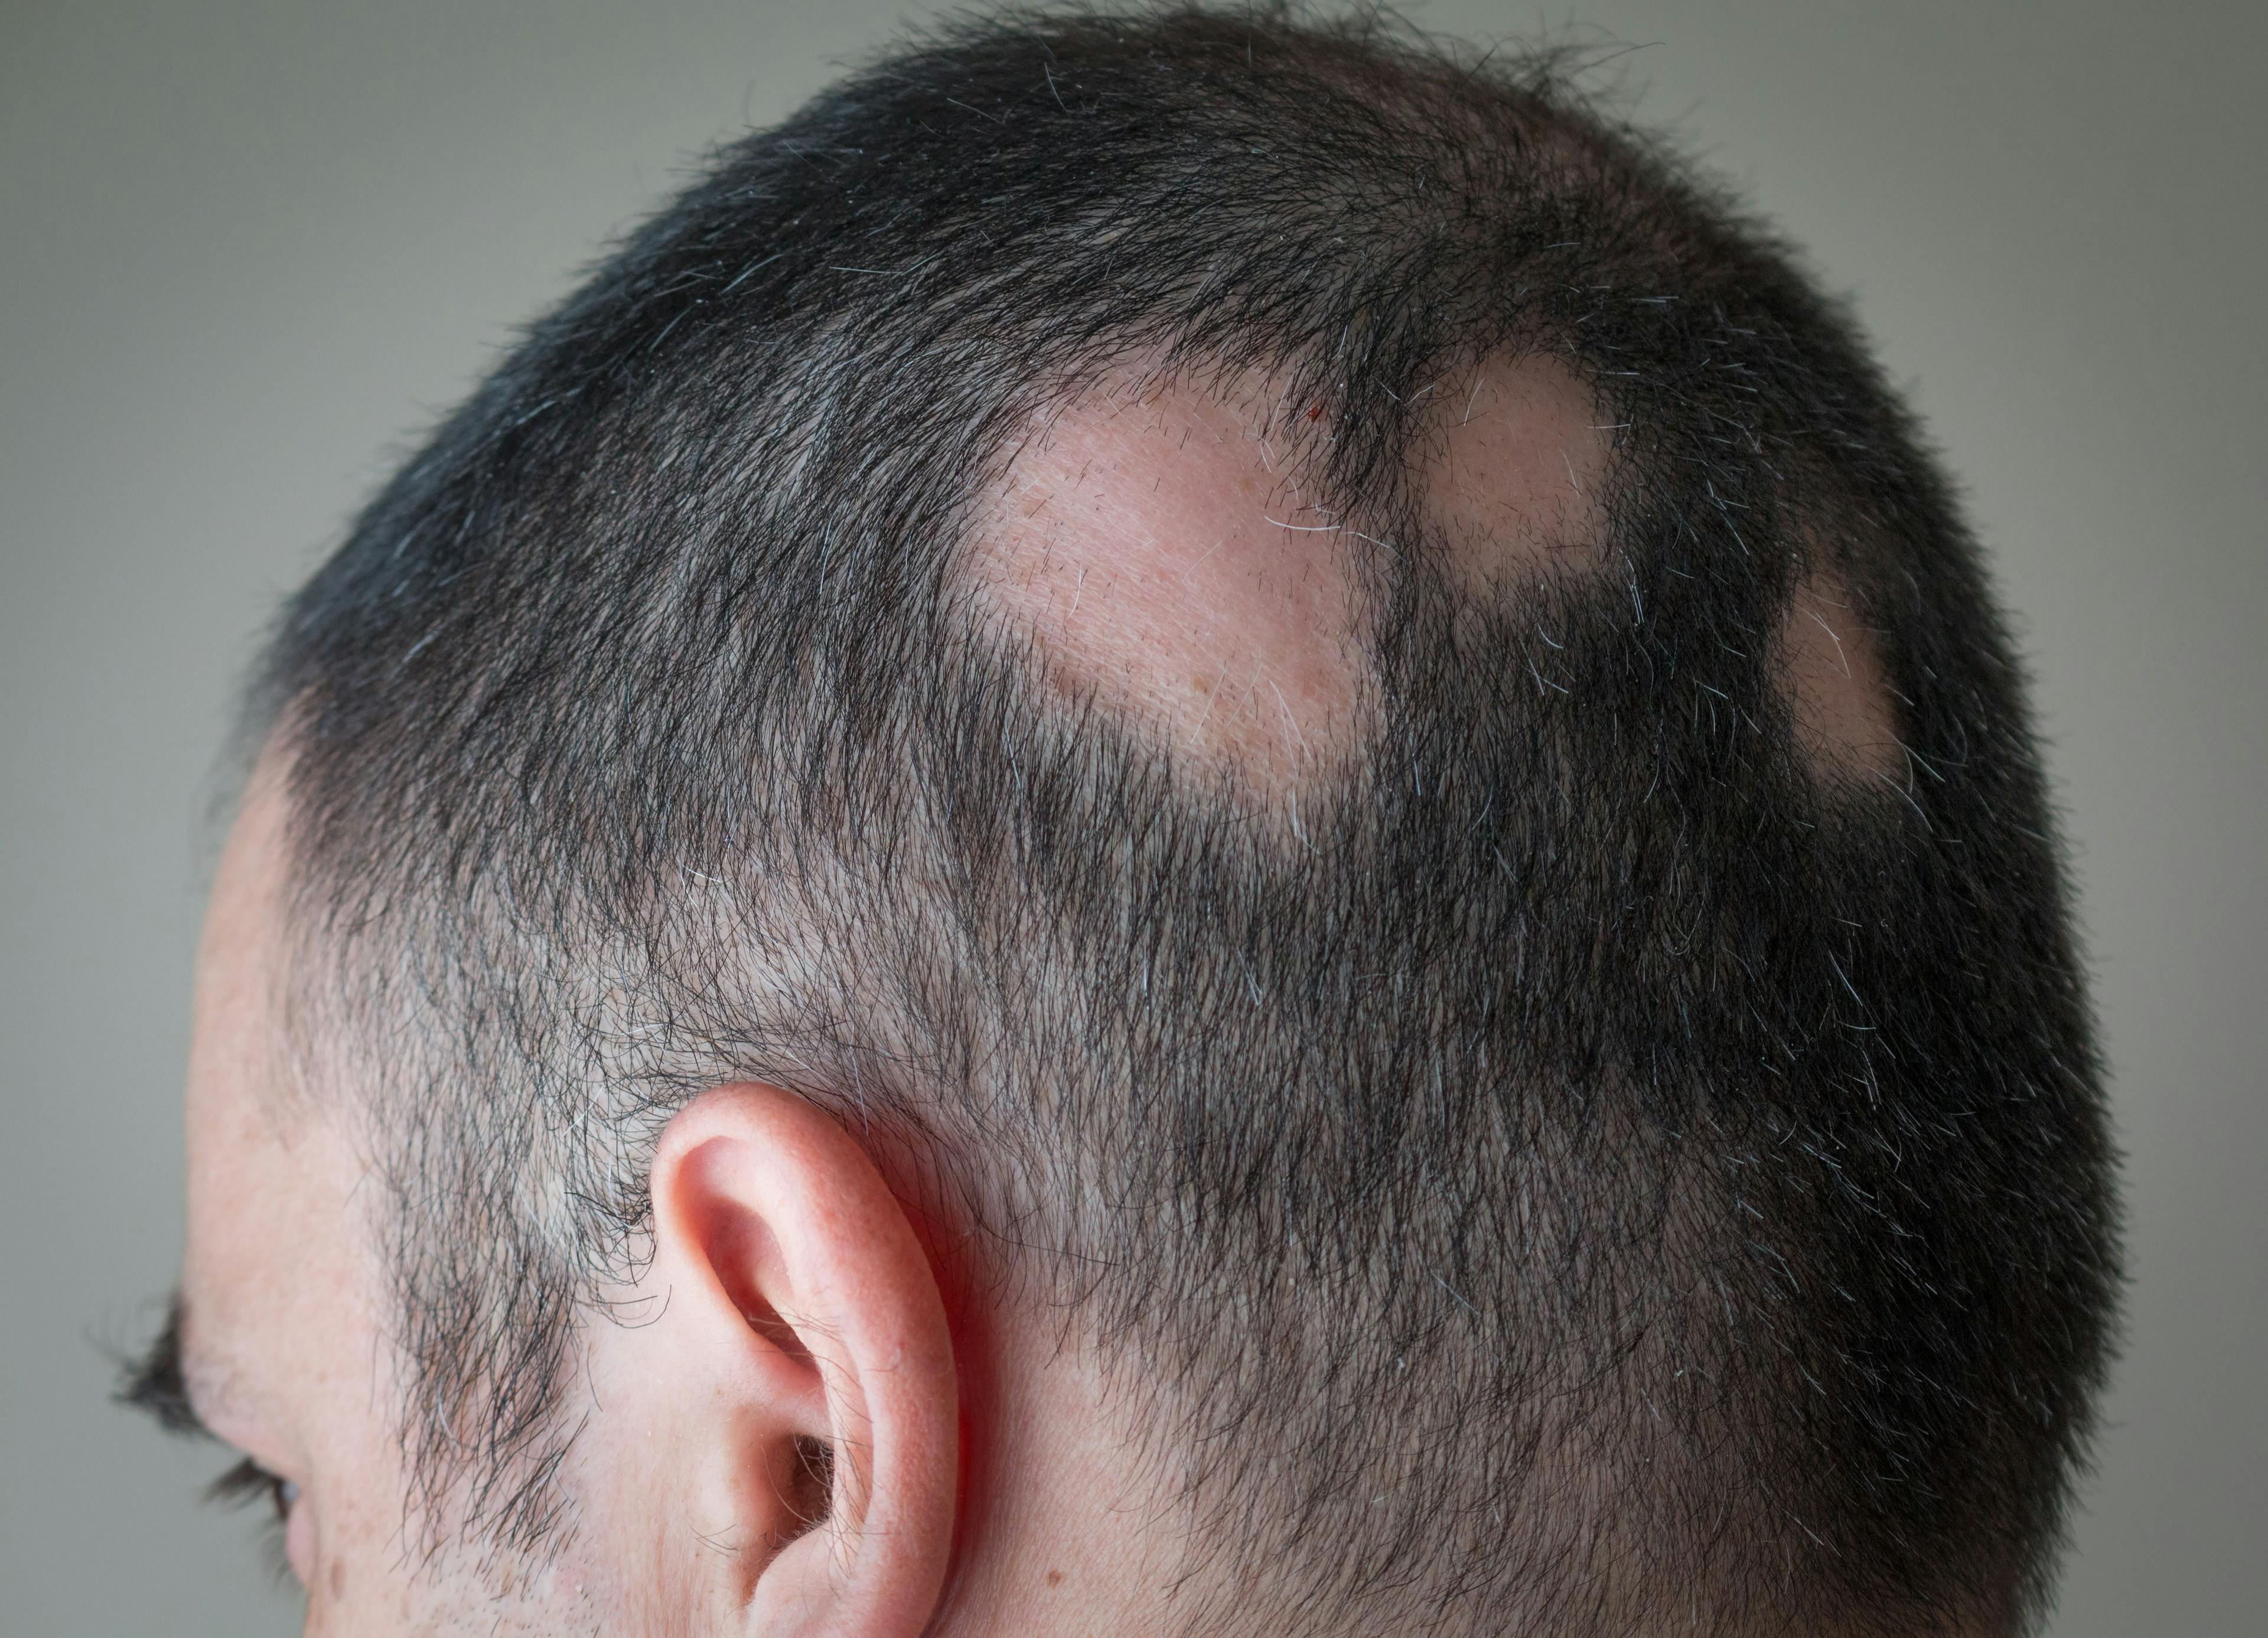 New Study Shows Prevalence of Alopecia Areata in People of Color